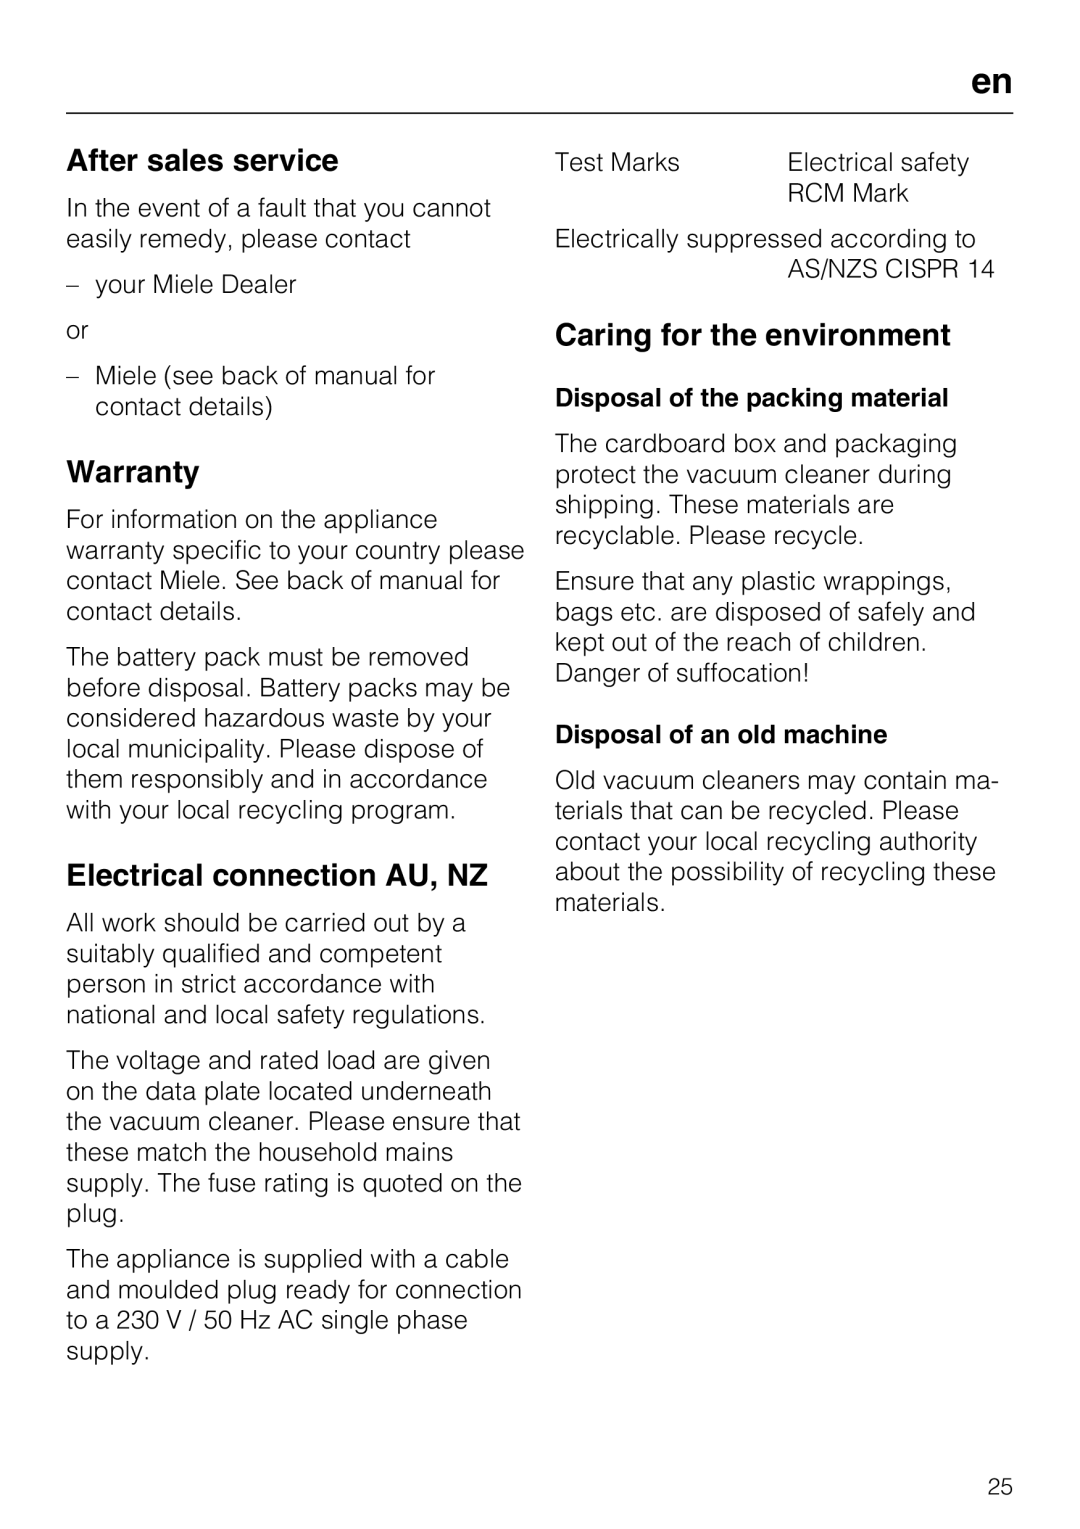 Miele HS17 manual After sales service, Warranty, Electrical connection AU, NZ, Caring for the environment 